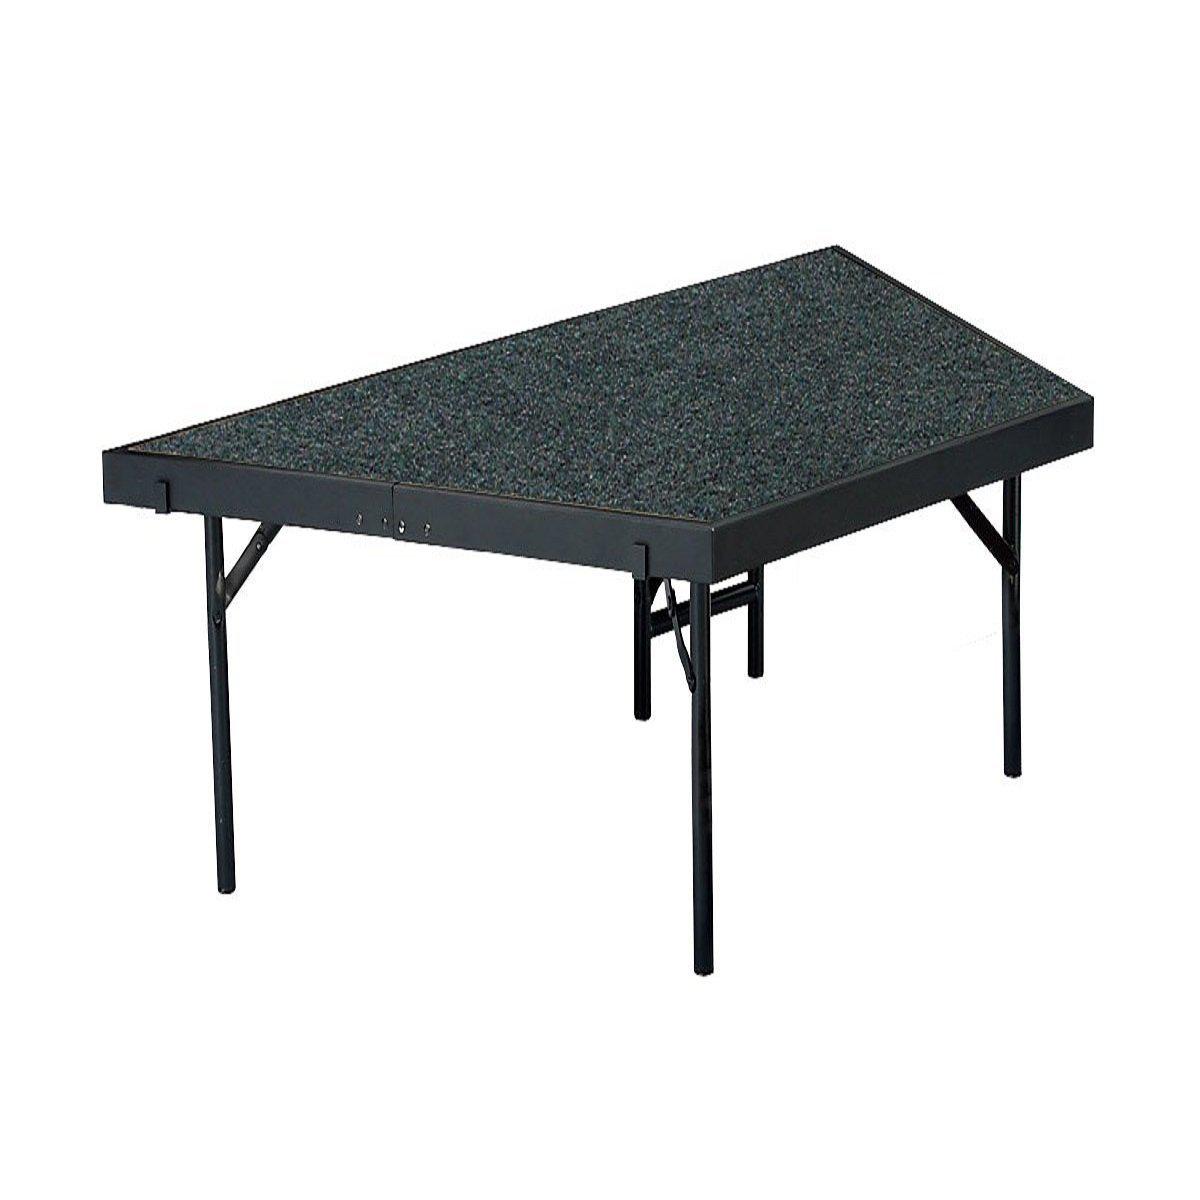 NPS® Stage Pies-Stages & Risers-For 3' x 8' x 16" Stage,-Grey Carpet-